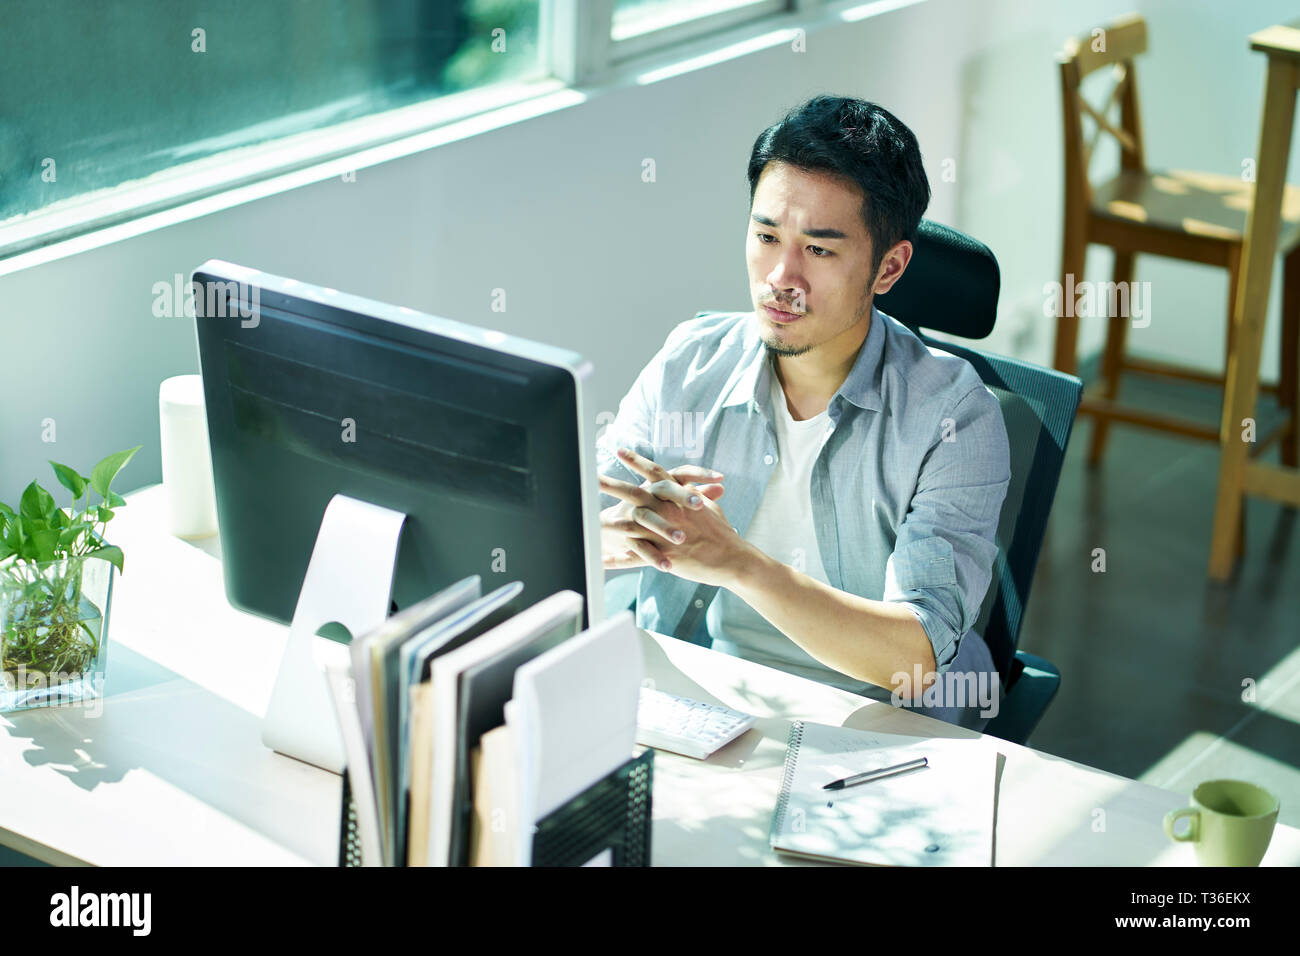 young asian business person sitting in office thinking while looking at monitor of desktop computer. Stock Photo